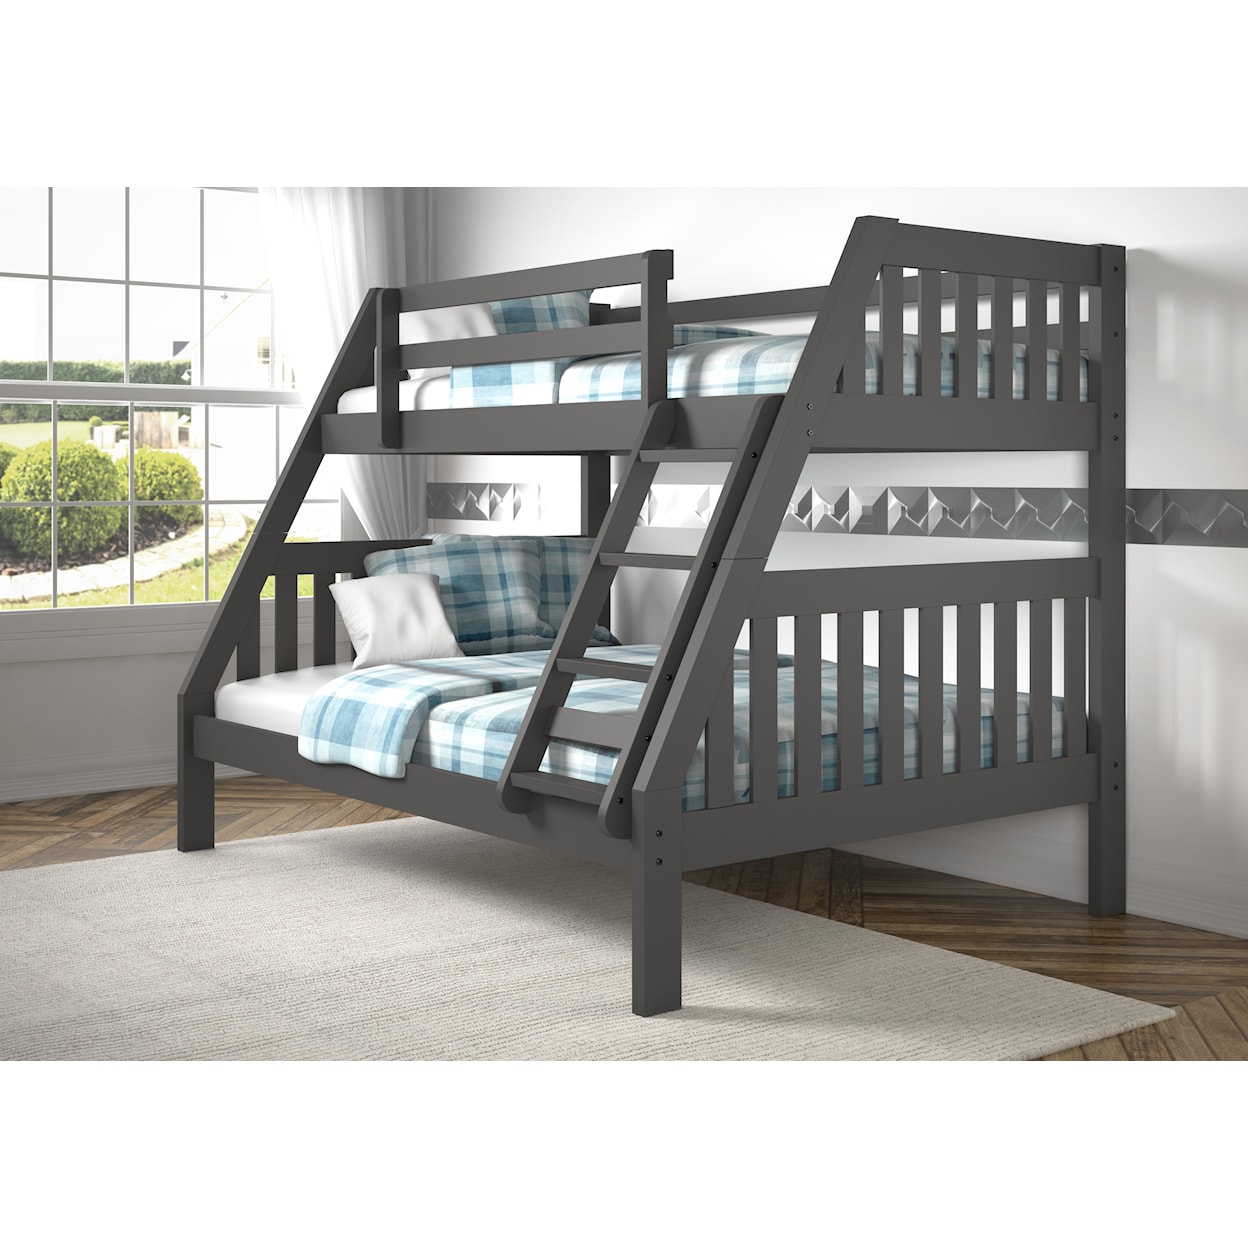 Donco Trading Co 1018 Twin over Full Bunk Bed